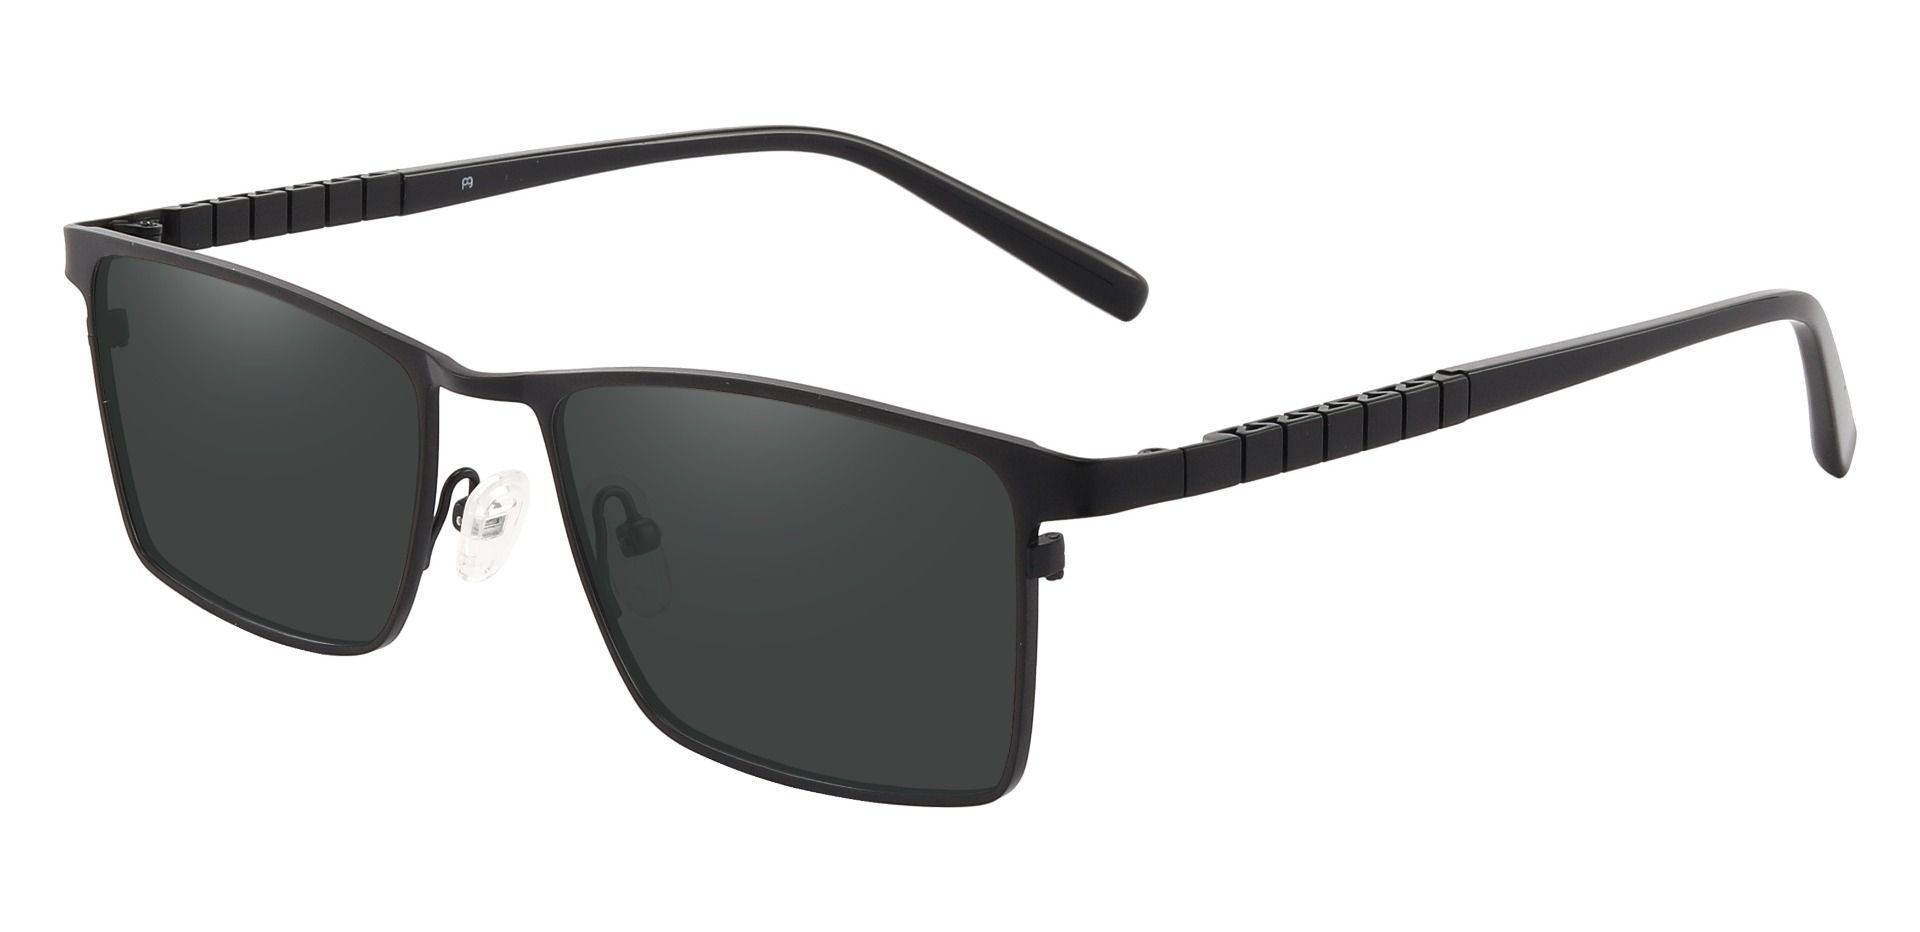 Cheshire Rectangle Lined Bifocal Sunglasses - Black Frame With Gray Lenses